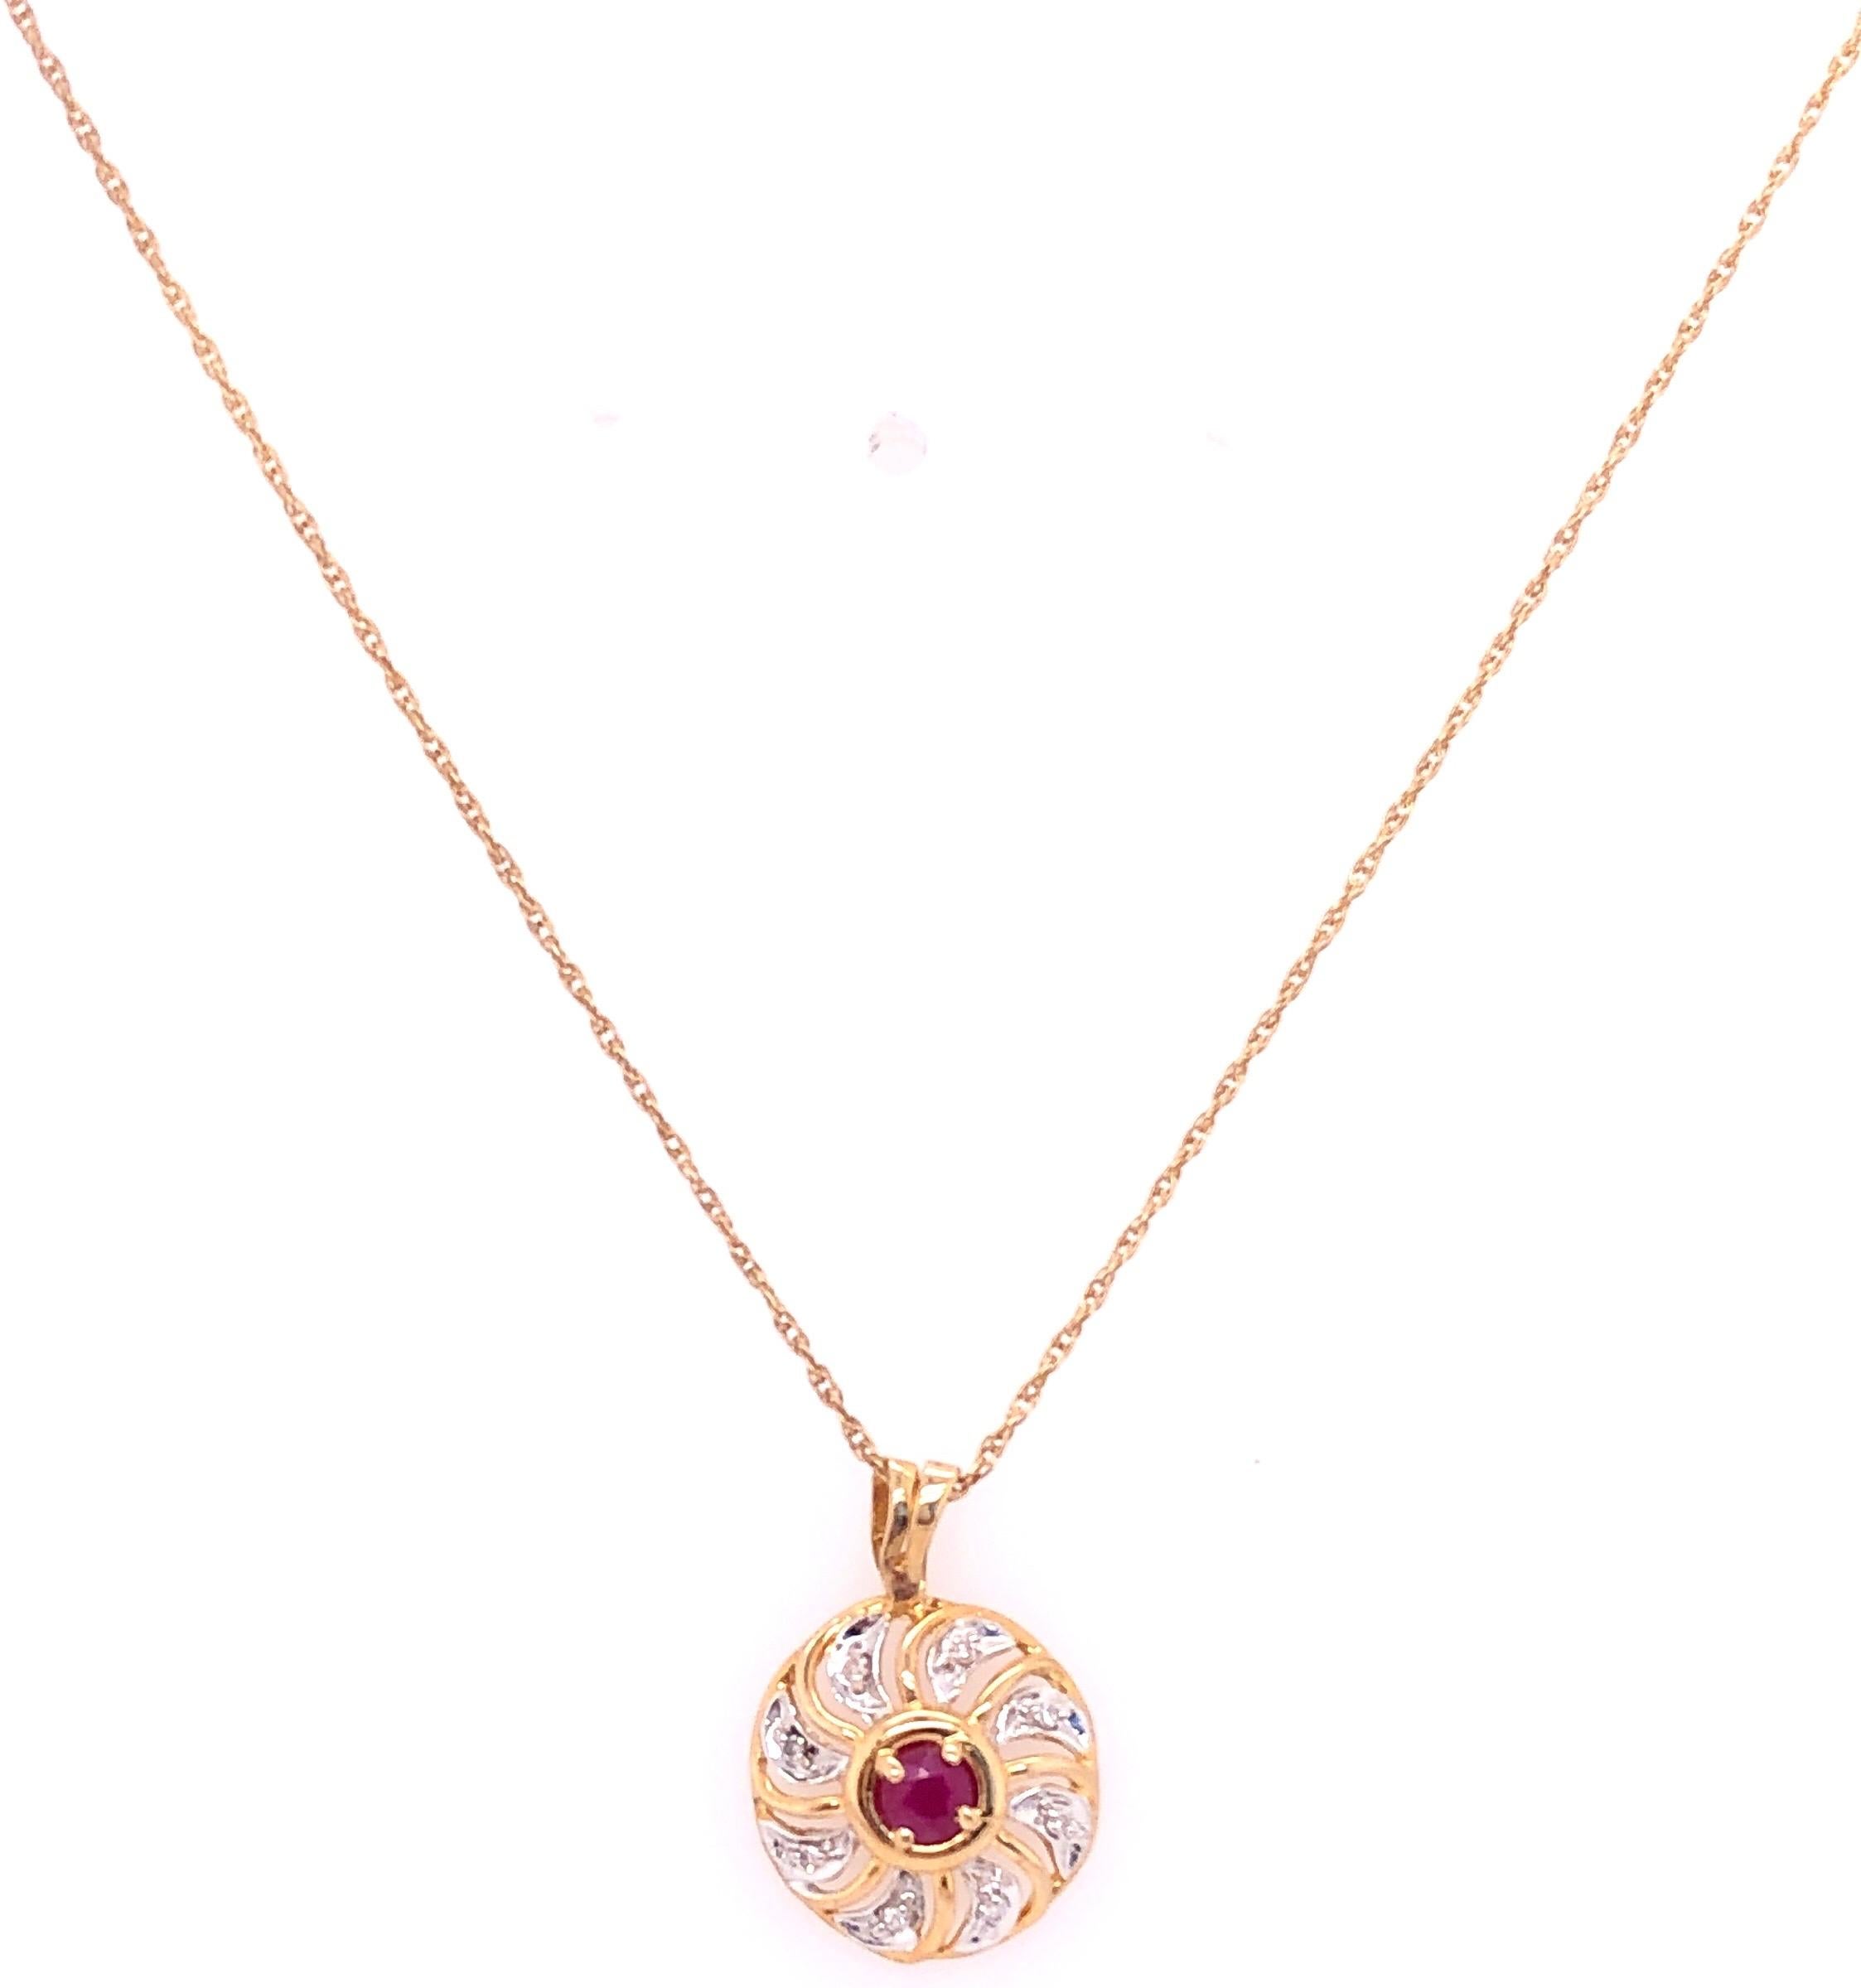 Modern 14 Karat Yellow Gold Necklace with Garnet and Diamond Pendant 0.08 TDW For Sale